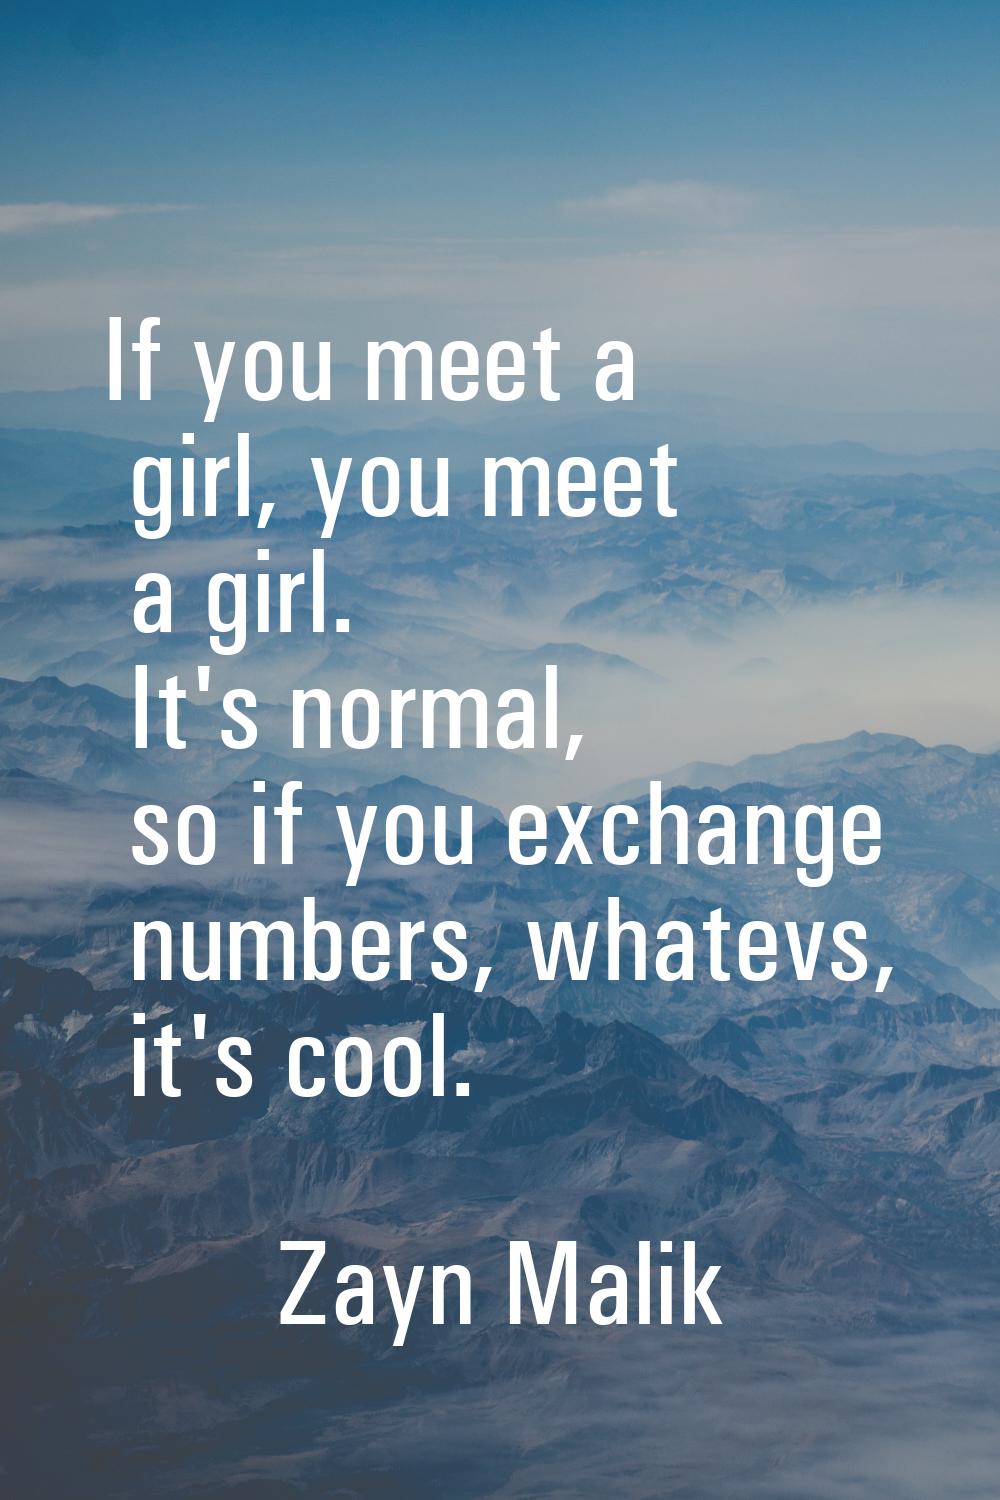 If you meet a girl, you meet a girl. It's normal, so if you exchange numbers, whatevs, it's cool.